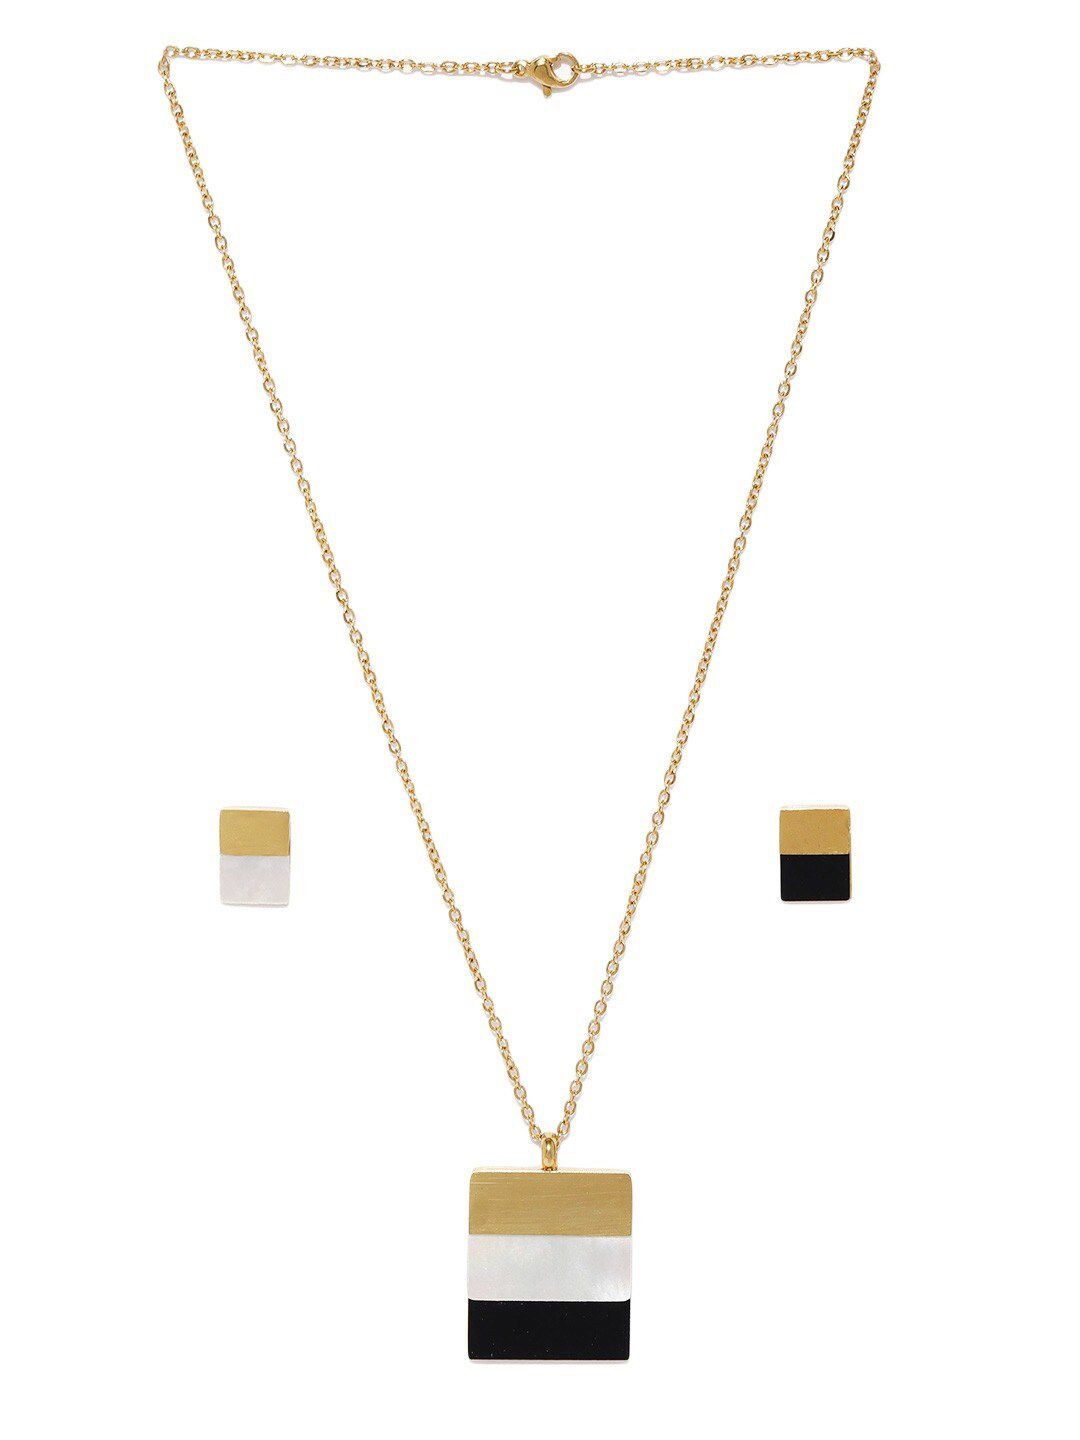 Blisscovered Woman Gold-Toned & Black Necklace Price in India